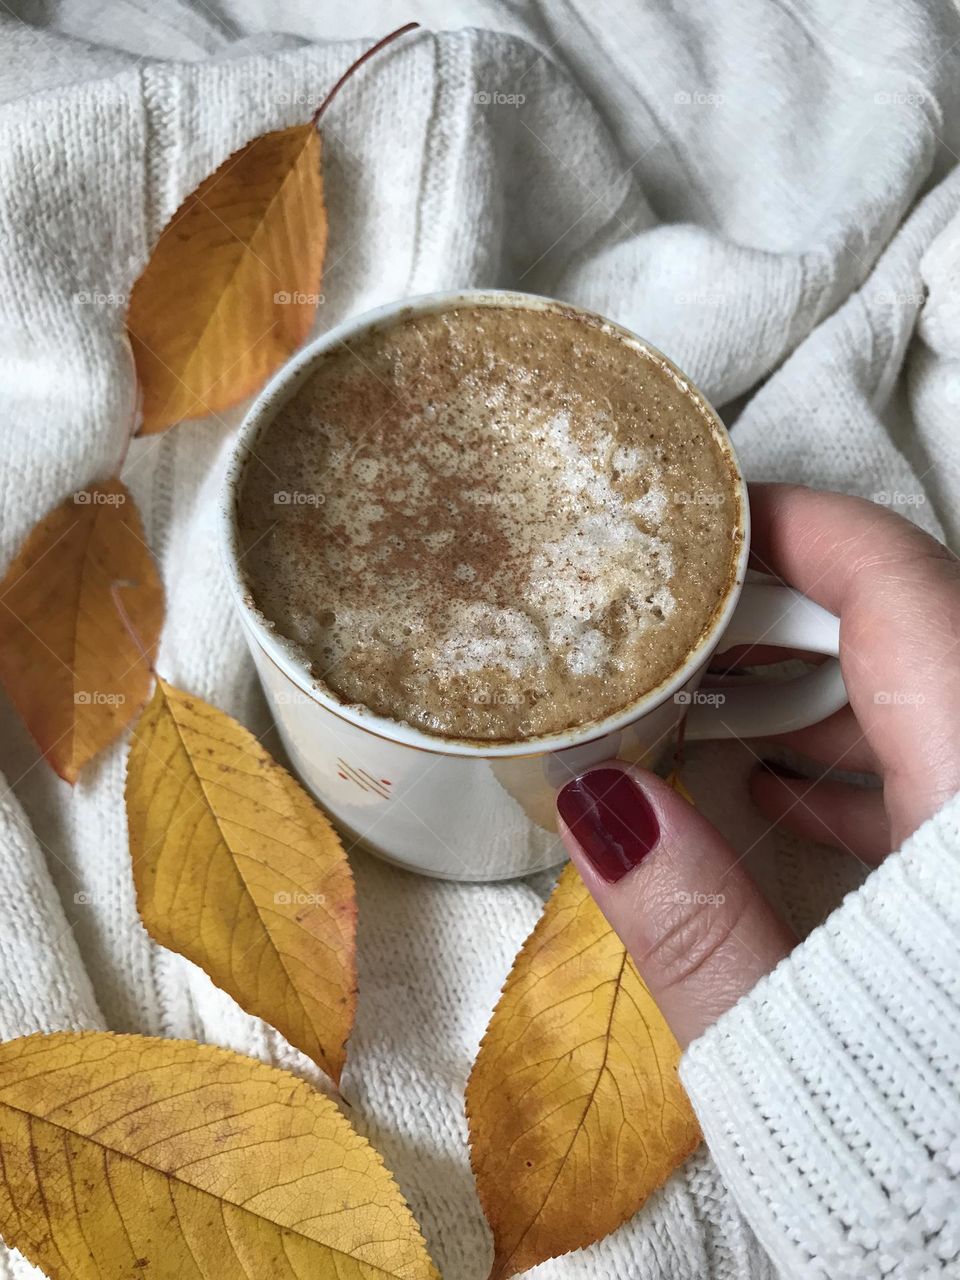 A warm drink on a cold fall day